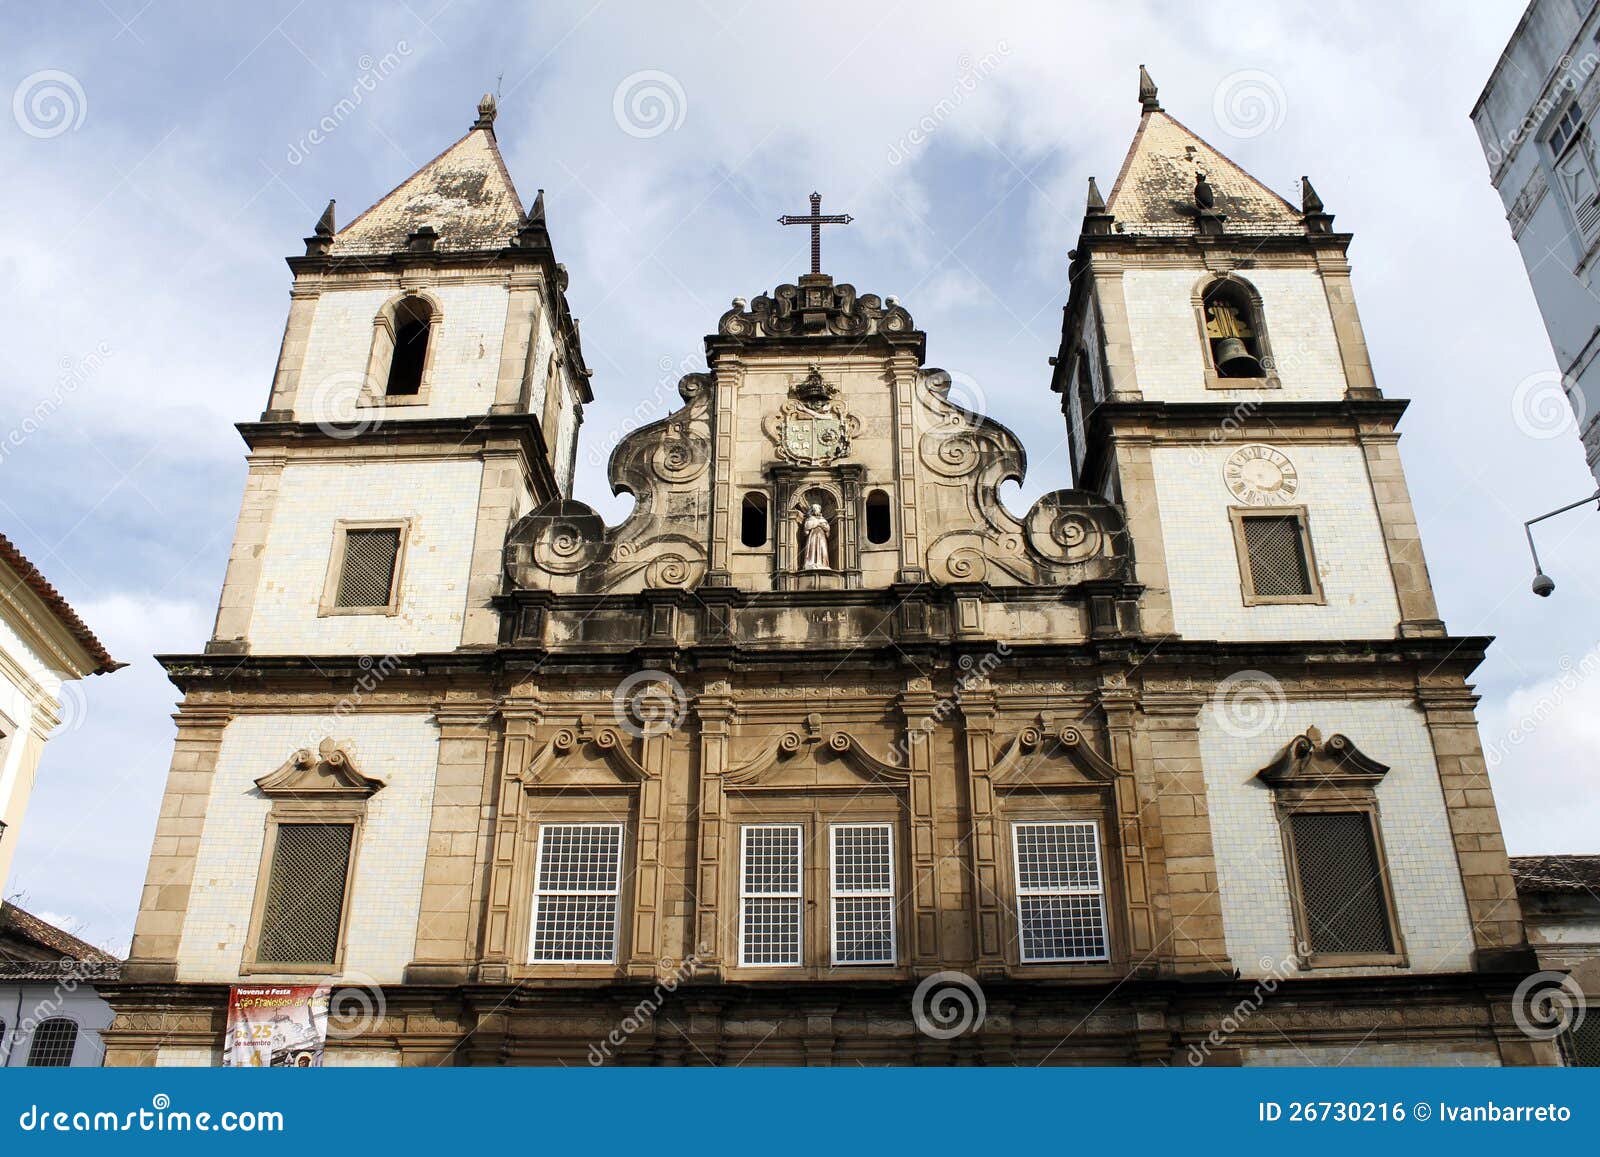 church of st. francis of assisi in salvador, bahia